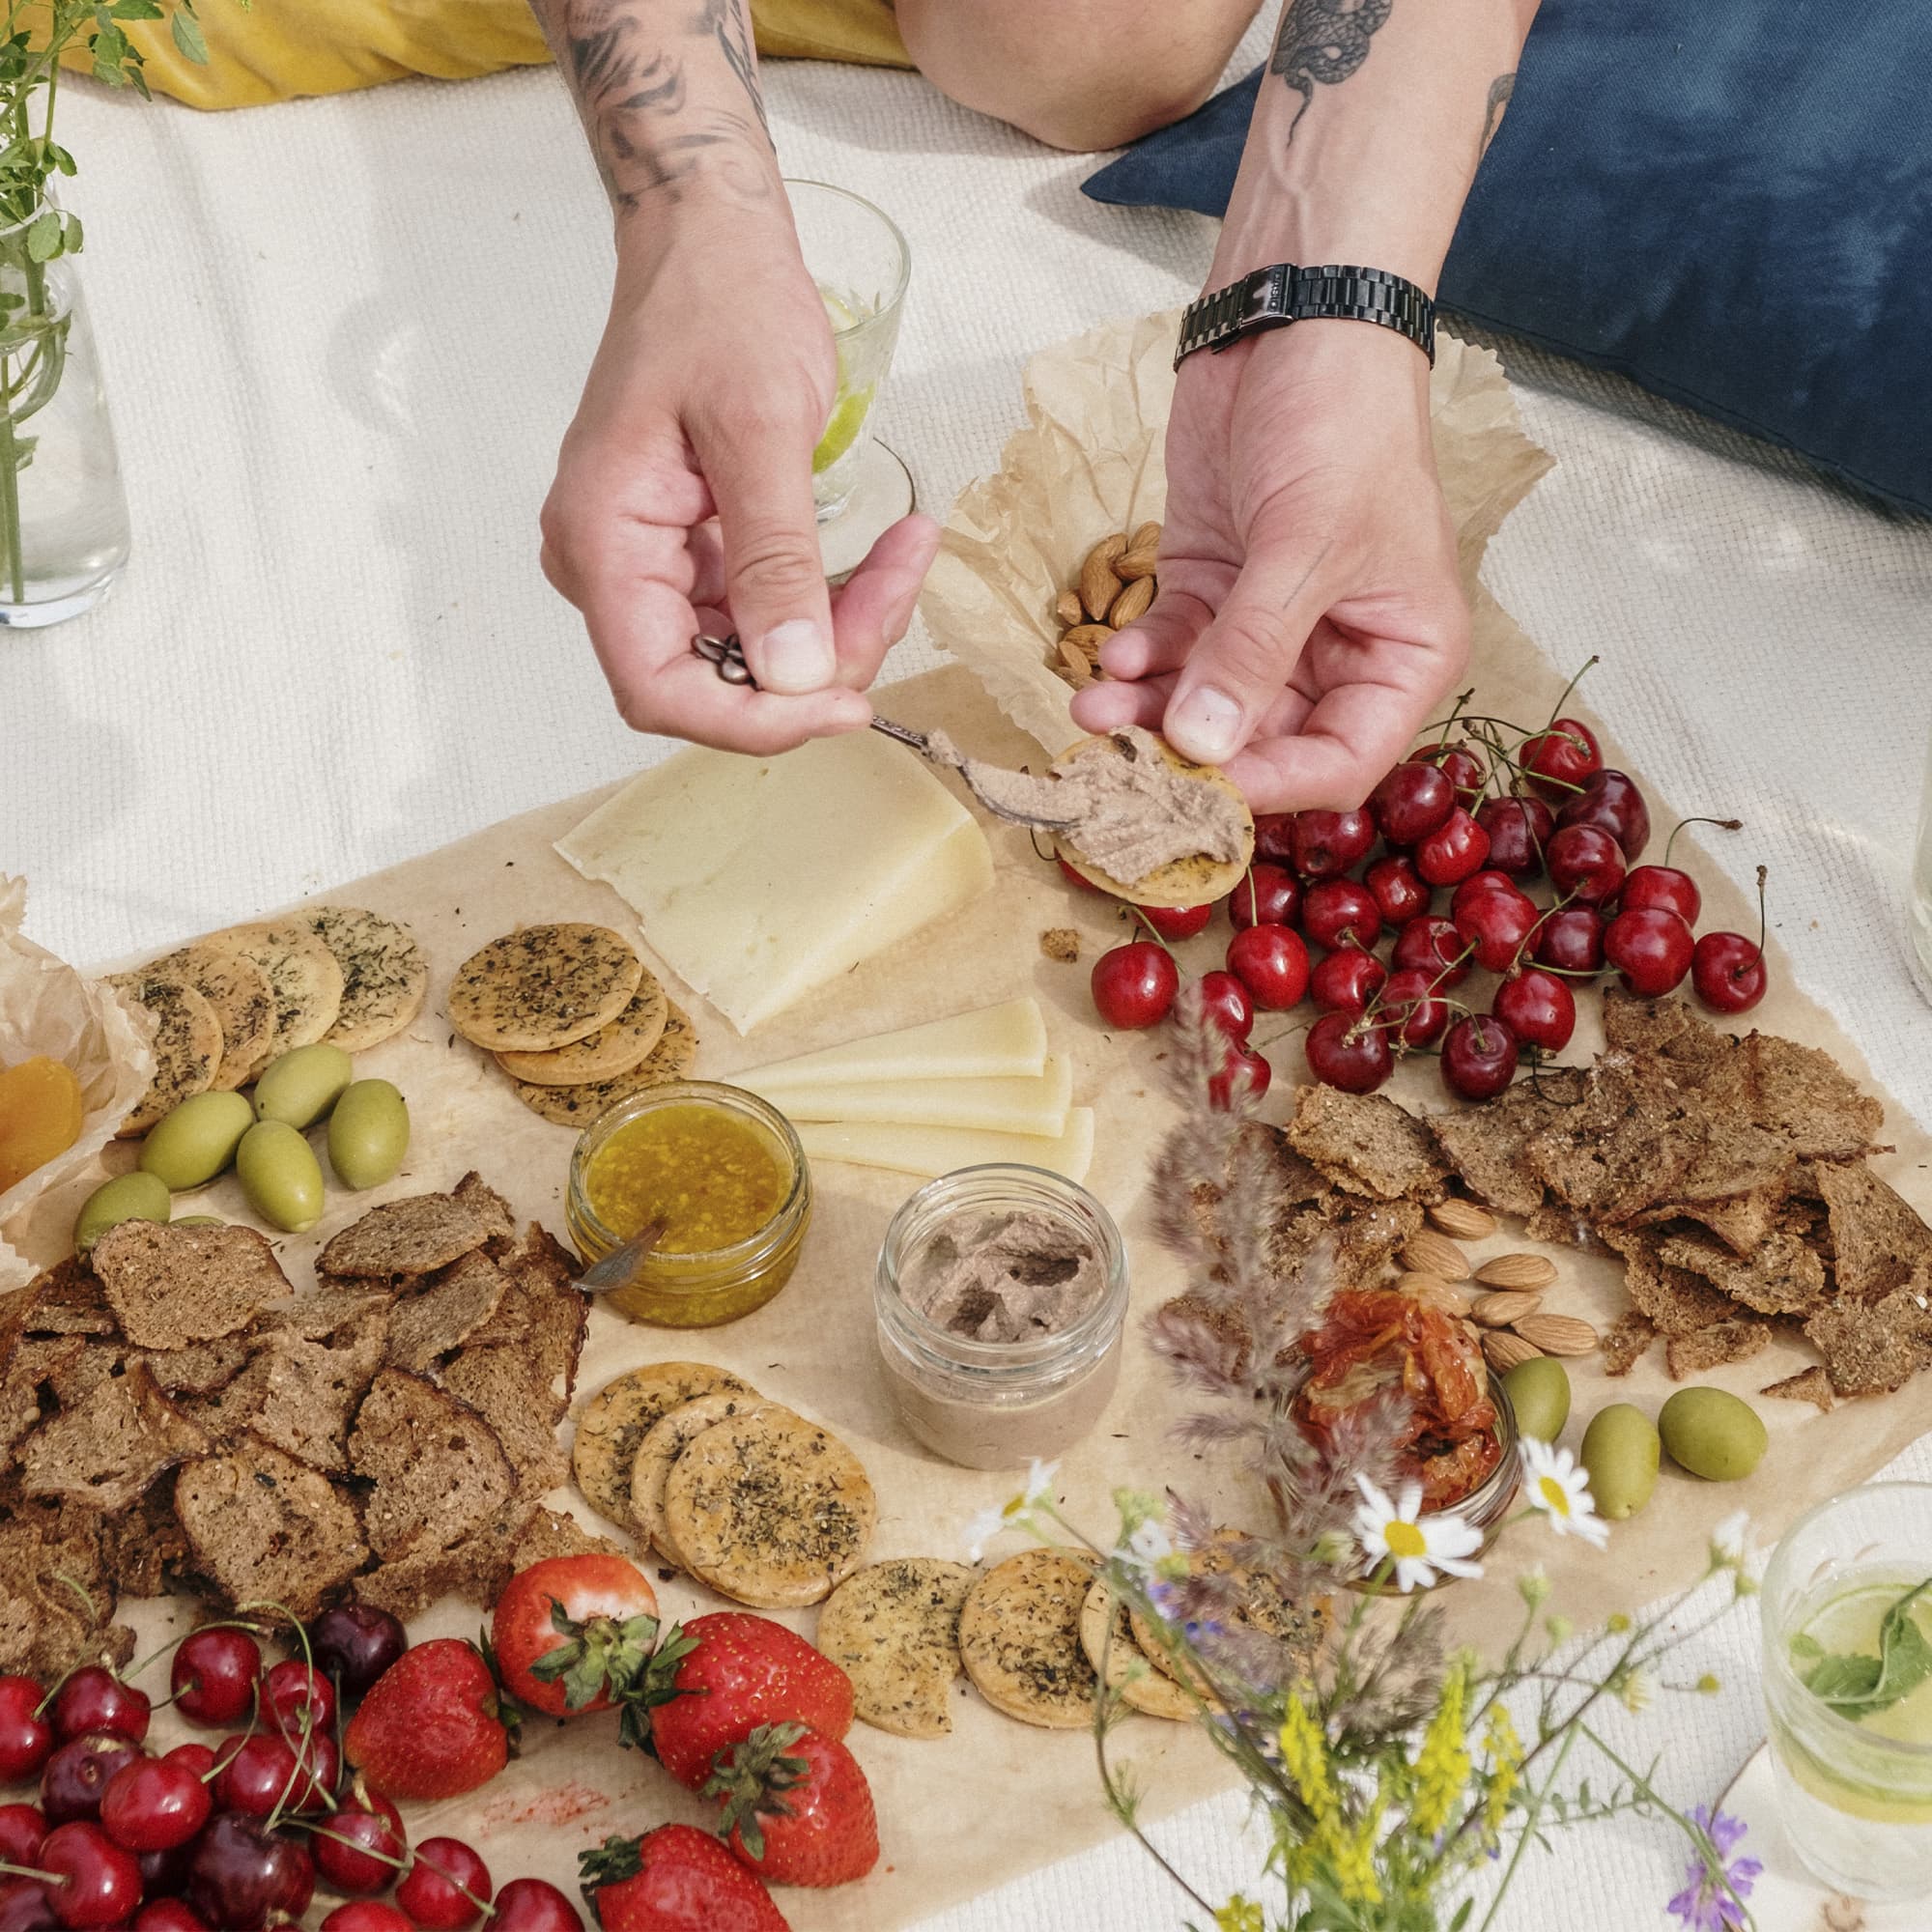 Embark on a Mystery Picnic in Seattle with AmazingCo! On this self-guided foodie adventure, you will solve clues to collect gourmet picnic treats and discover a hidden, picturesque picnic spot away from the crowds.